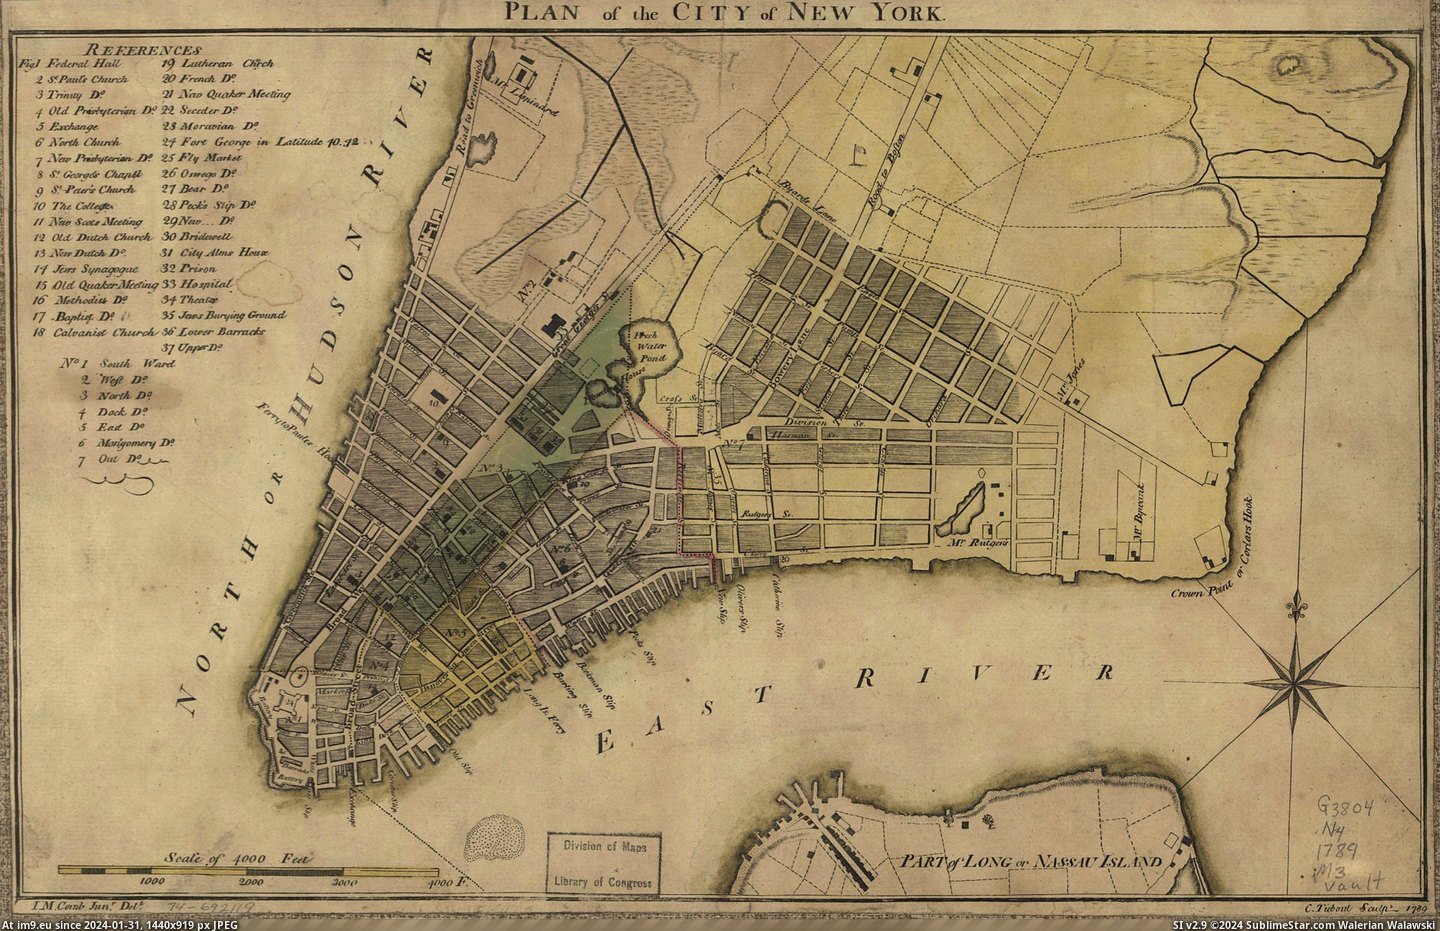 #City #York #Plan #Street [Mapporn] Street Plan for the City of New York. 1789 [3200 x 2054] Pic. (Image of album My r/MAPS favs))